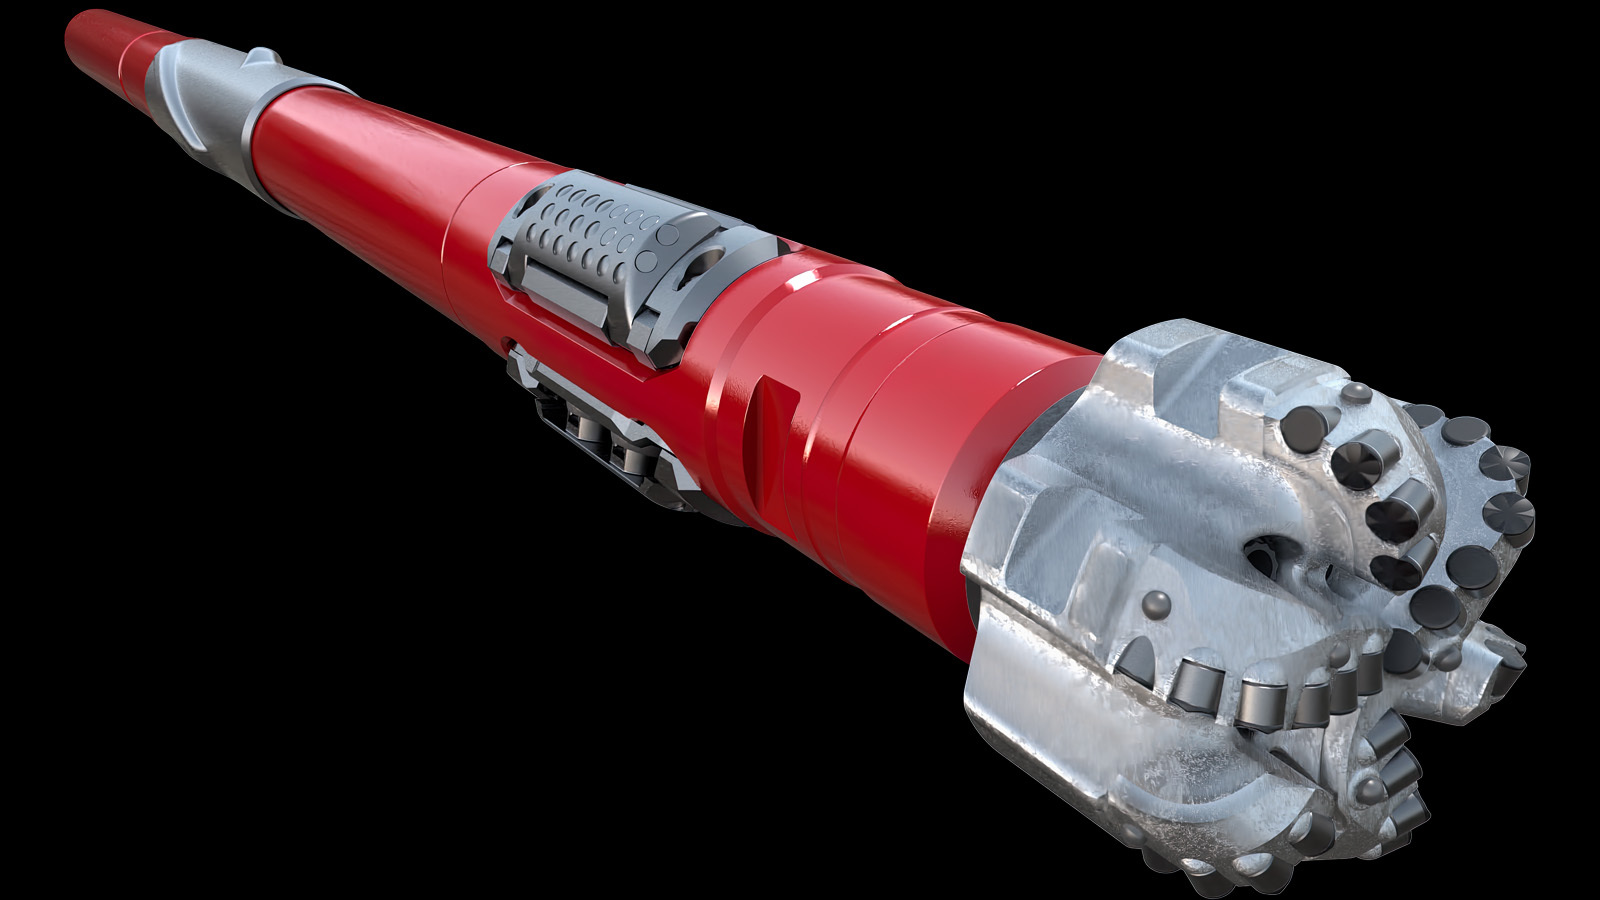 HyperSteer directional drill bit and iCruise® X rotary steerable system design